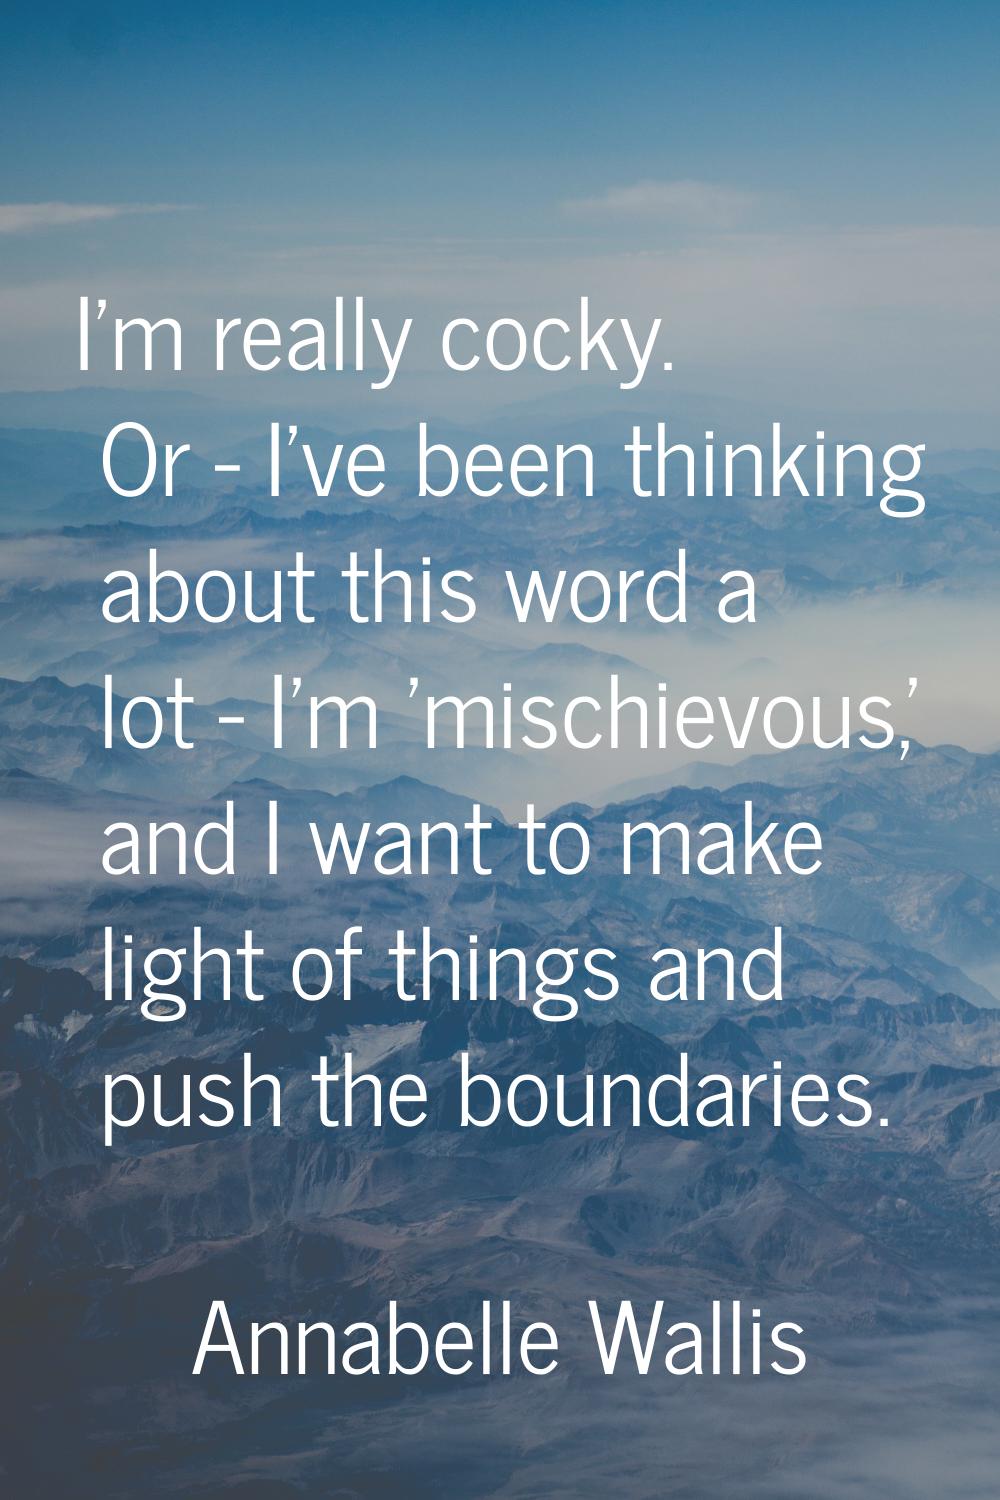 I'm really cocky. Or - I've been thinking about this word a lot - I'm 'mischievous,' and I want to 